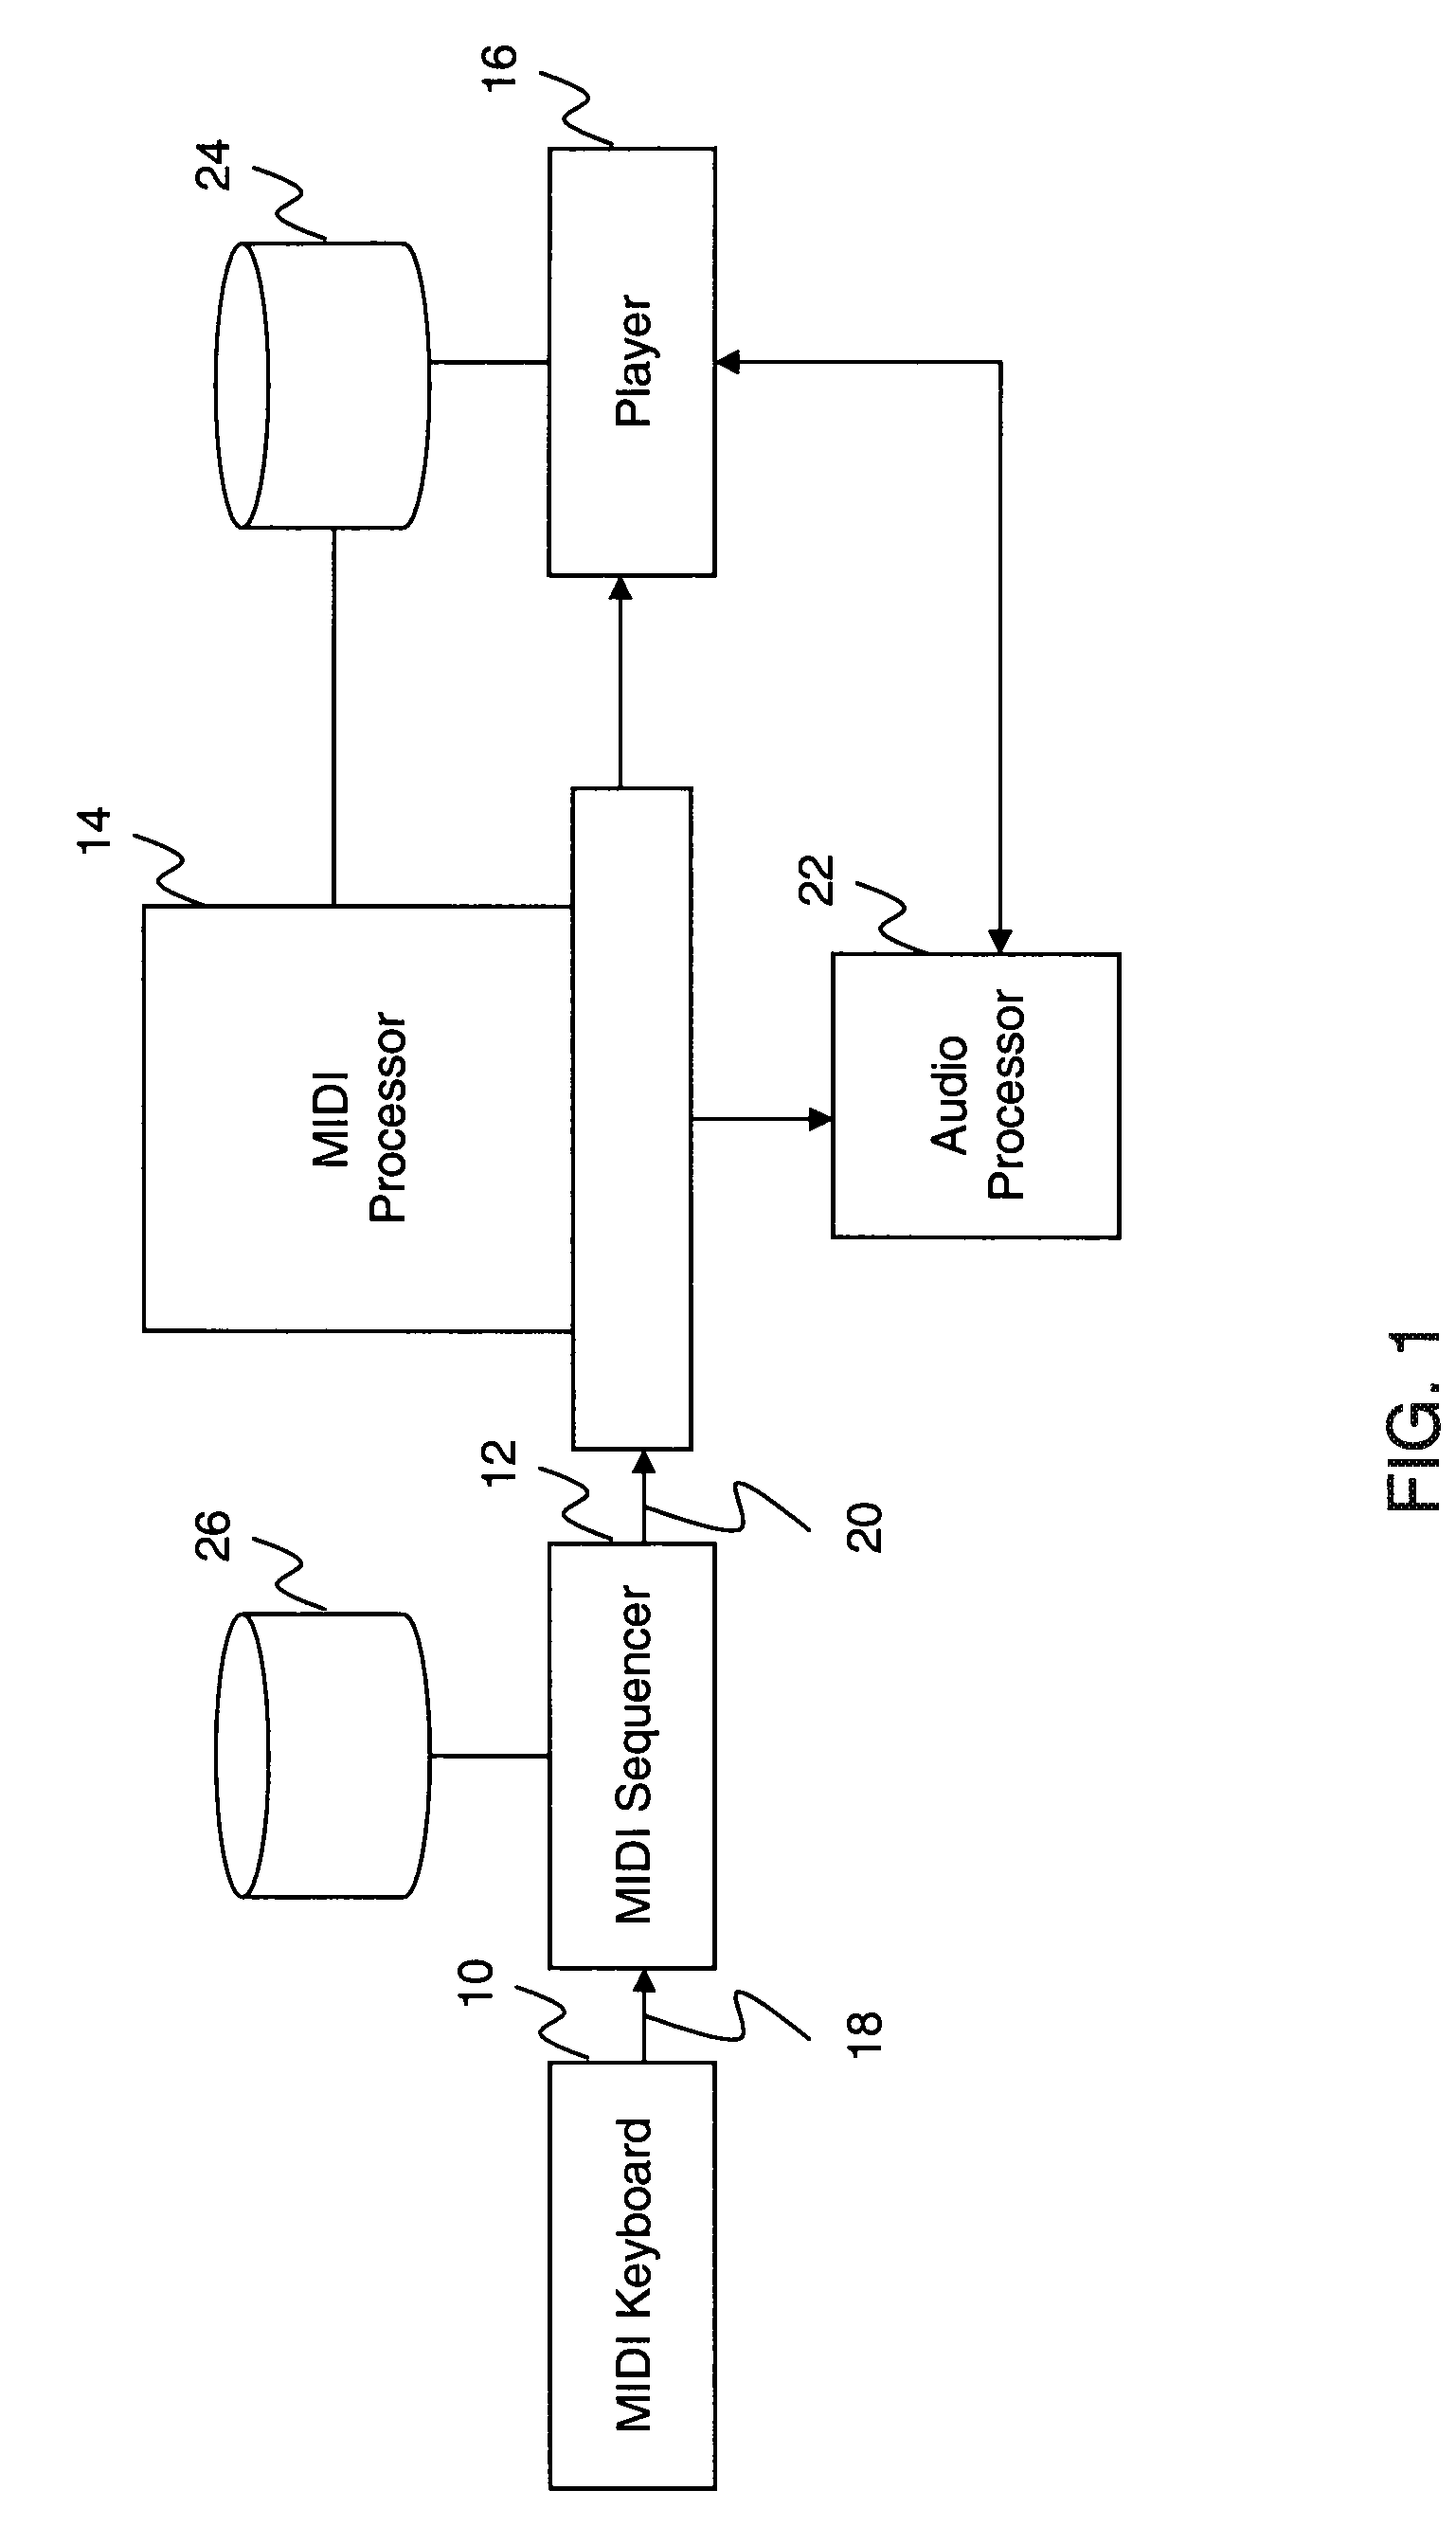 Advanced MIDI and audio processing system and method